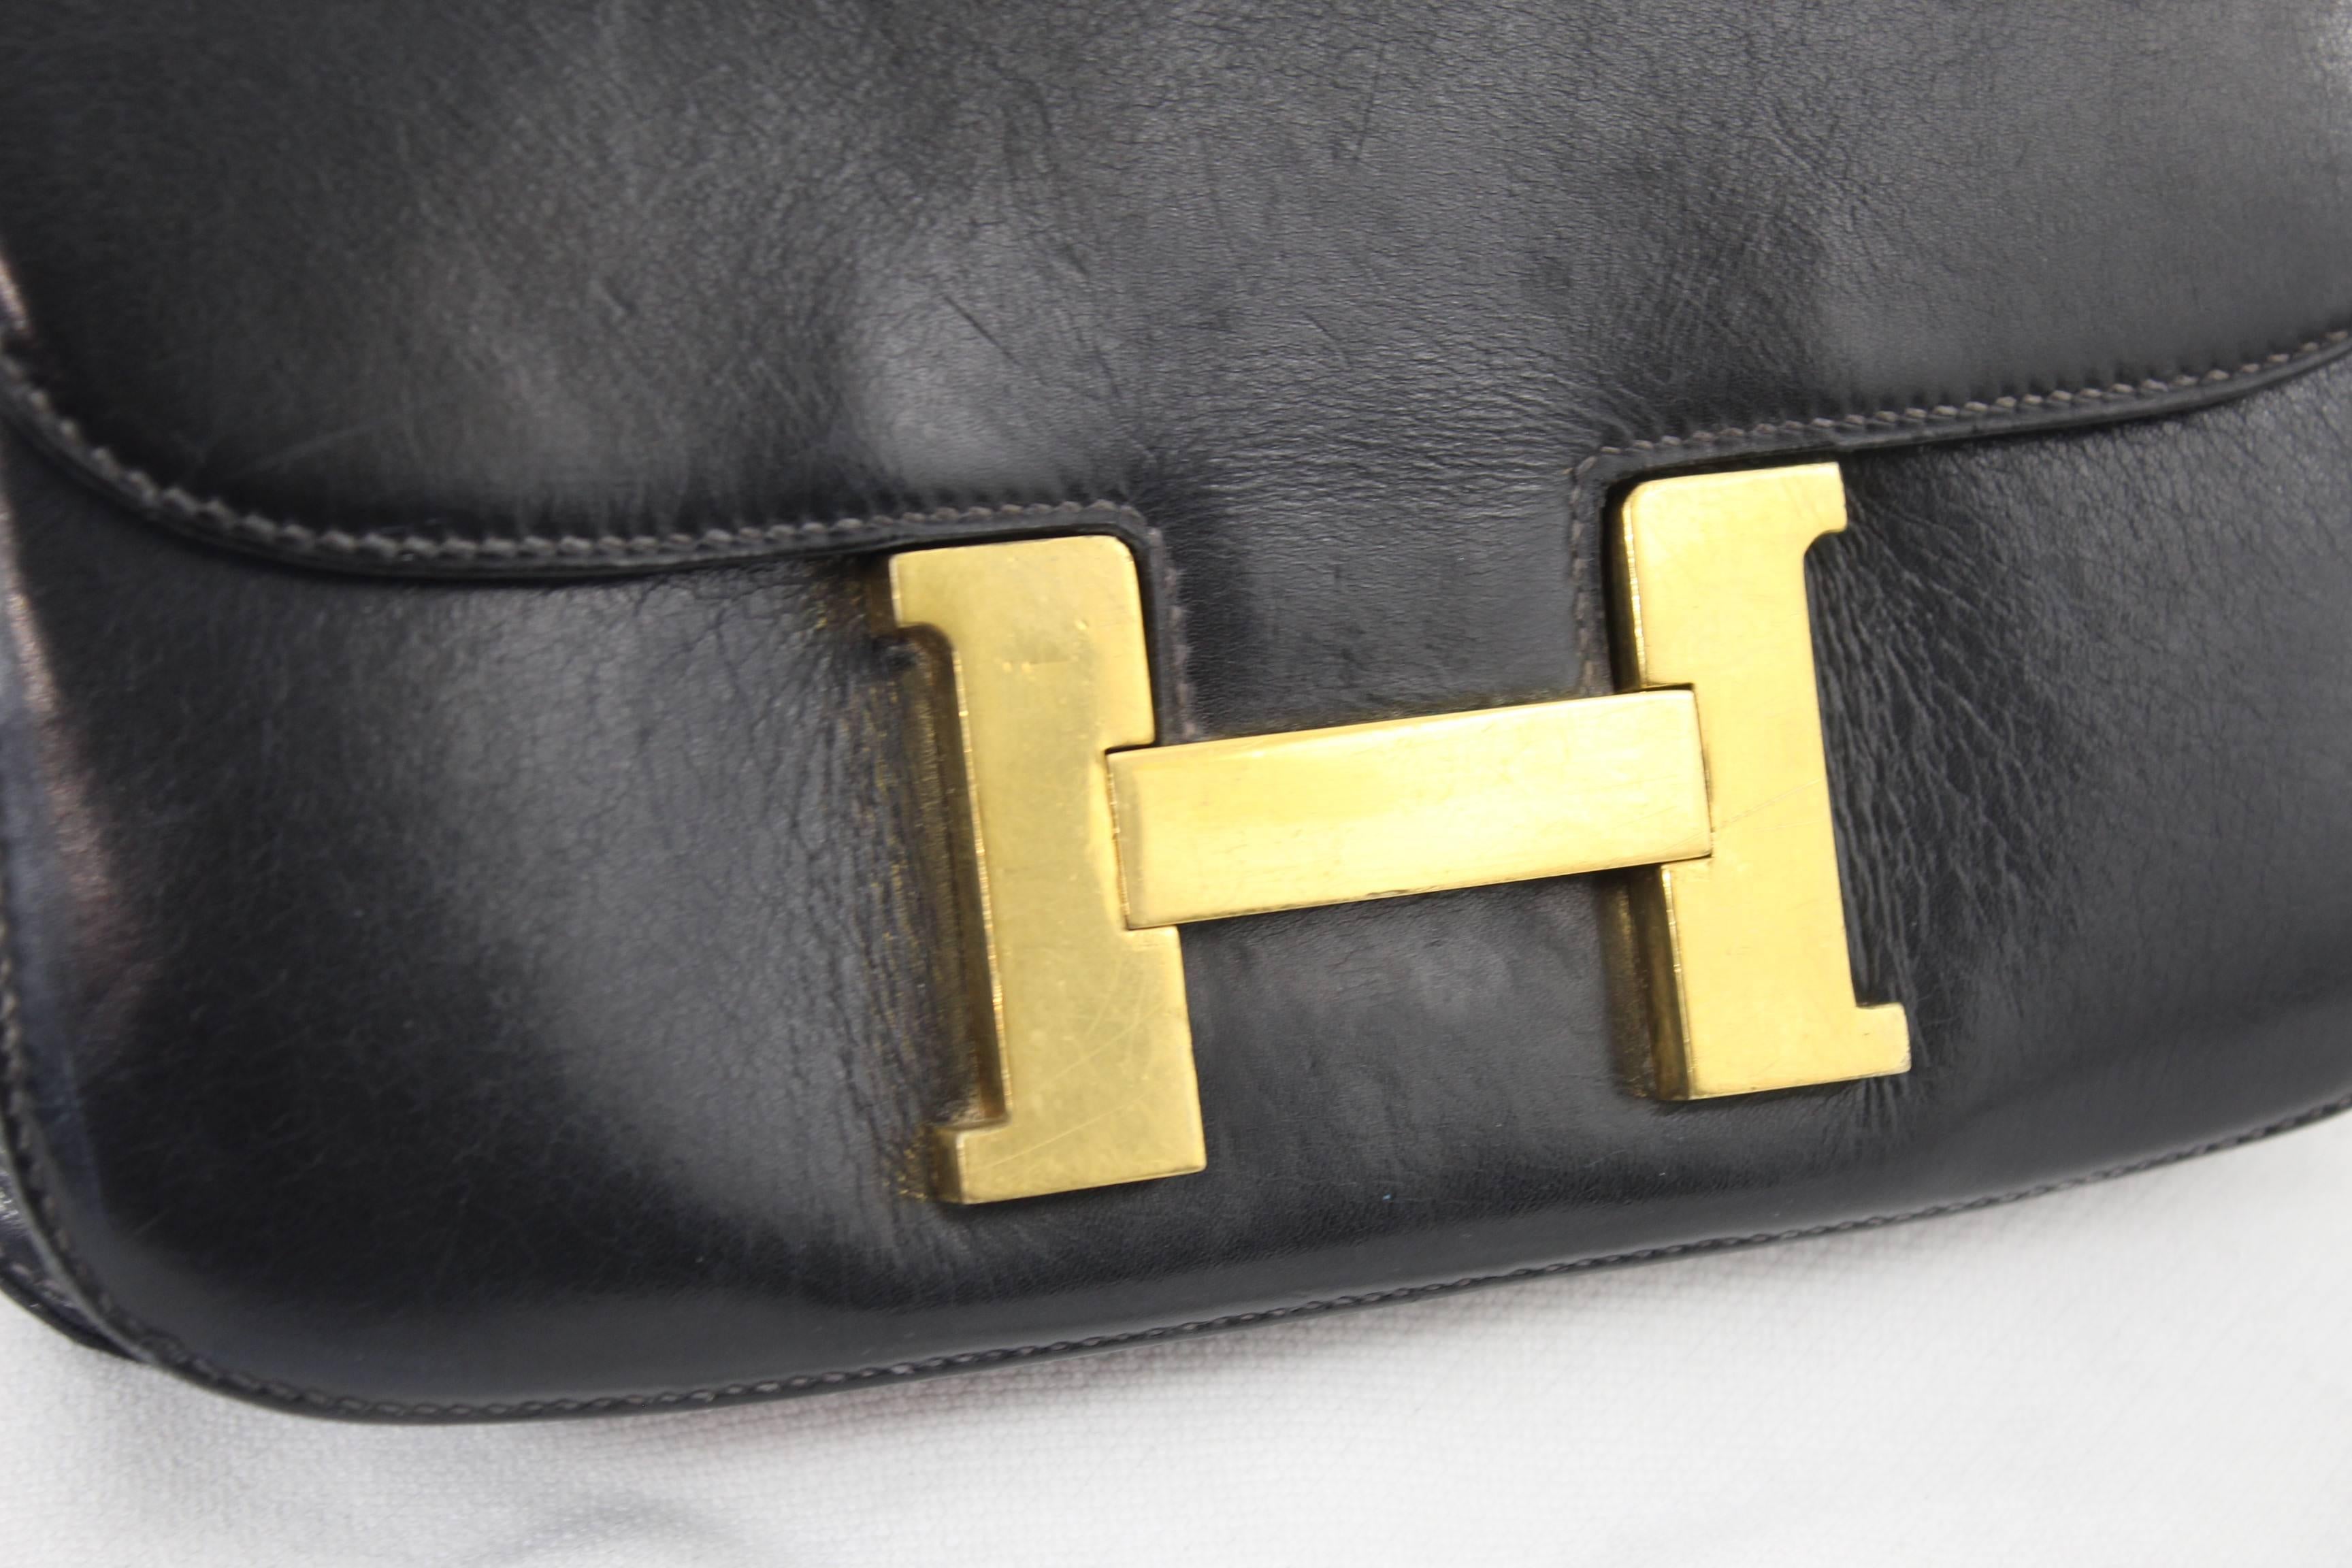 Super nice Vintage Hermes Constance

Nice vintage condition.

hand or sshoulder

Leather in good condition

Size 8.7*6.7 inches